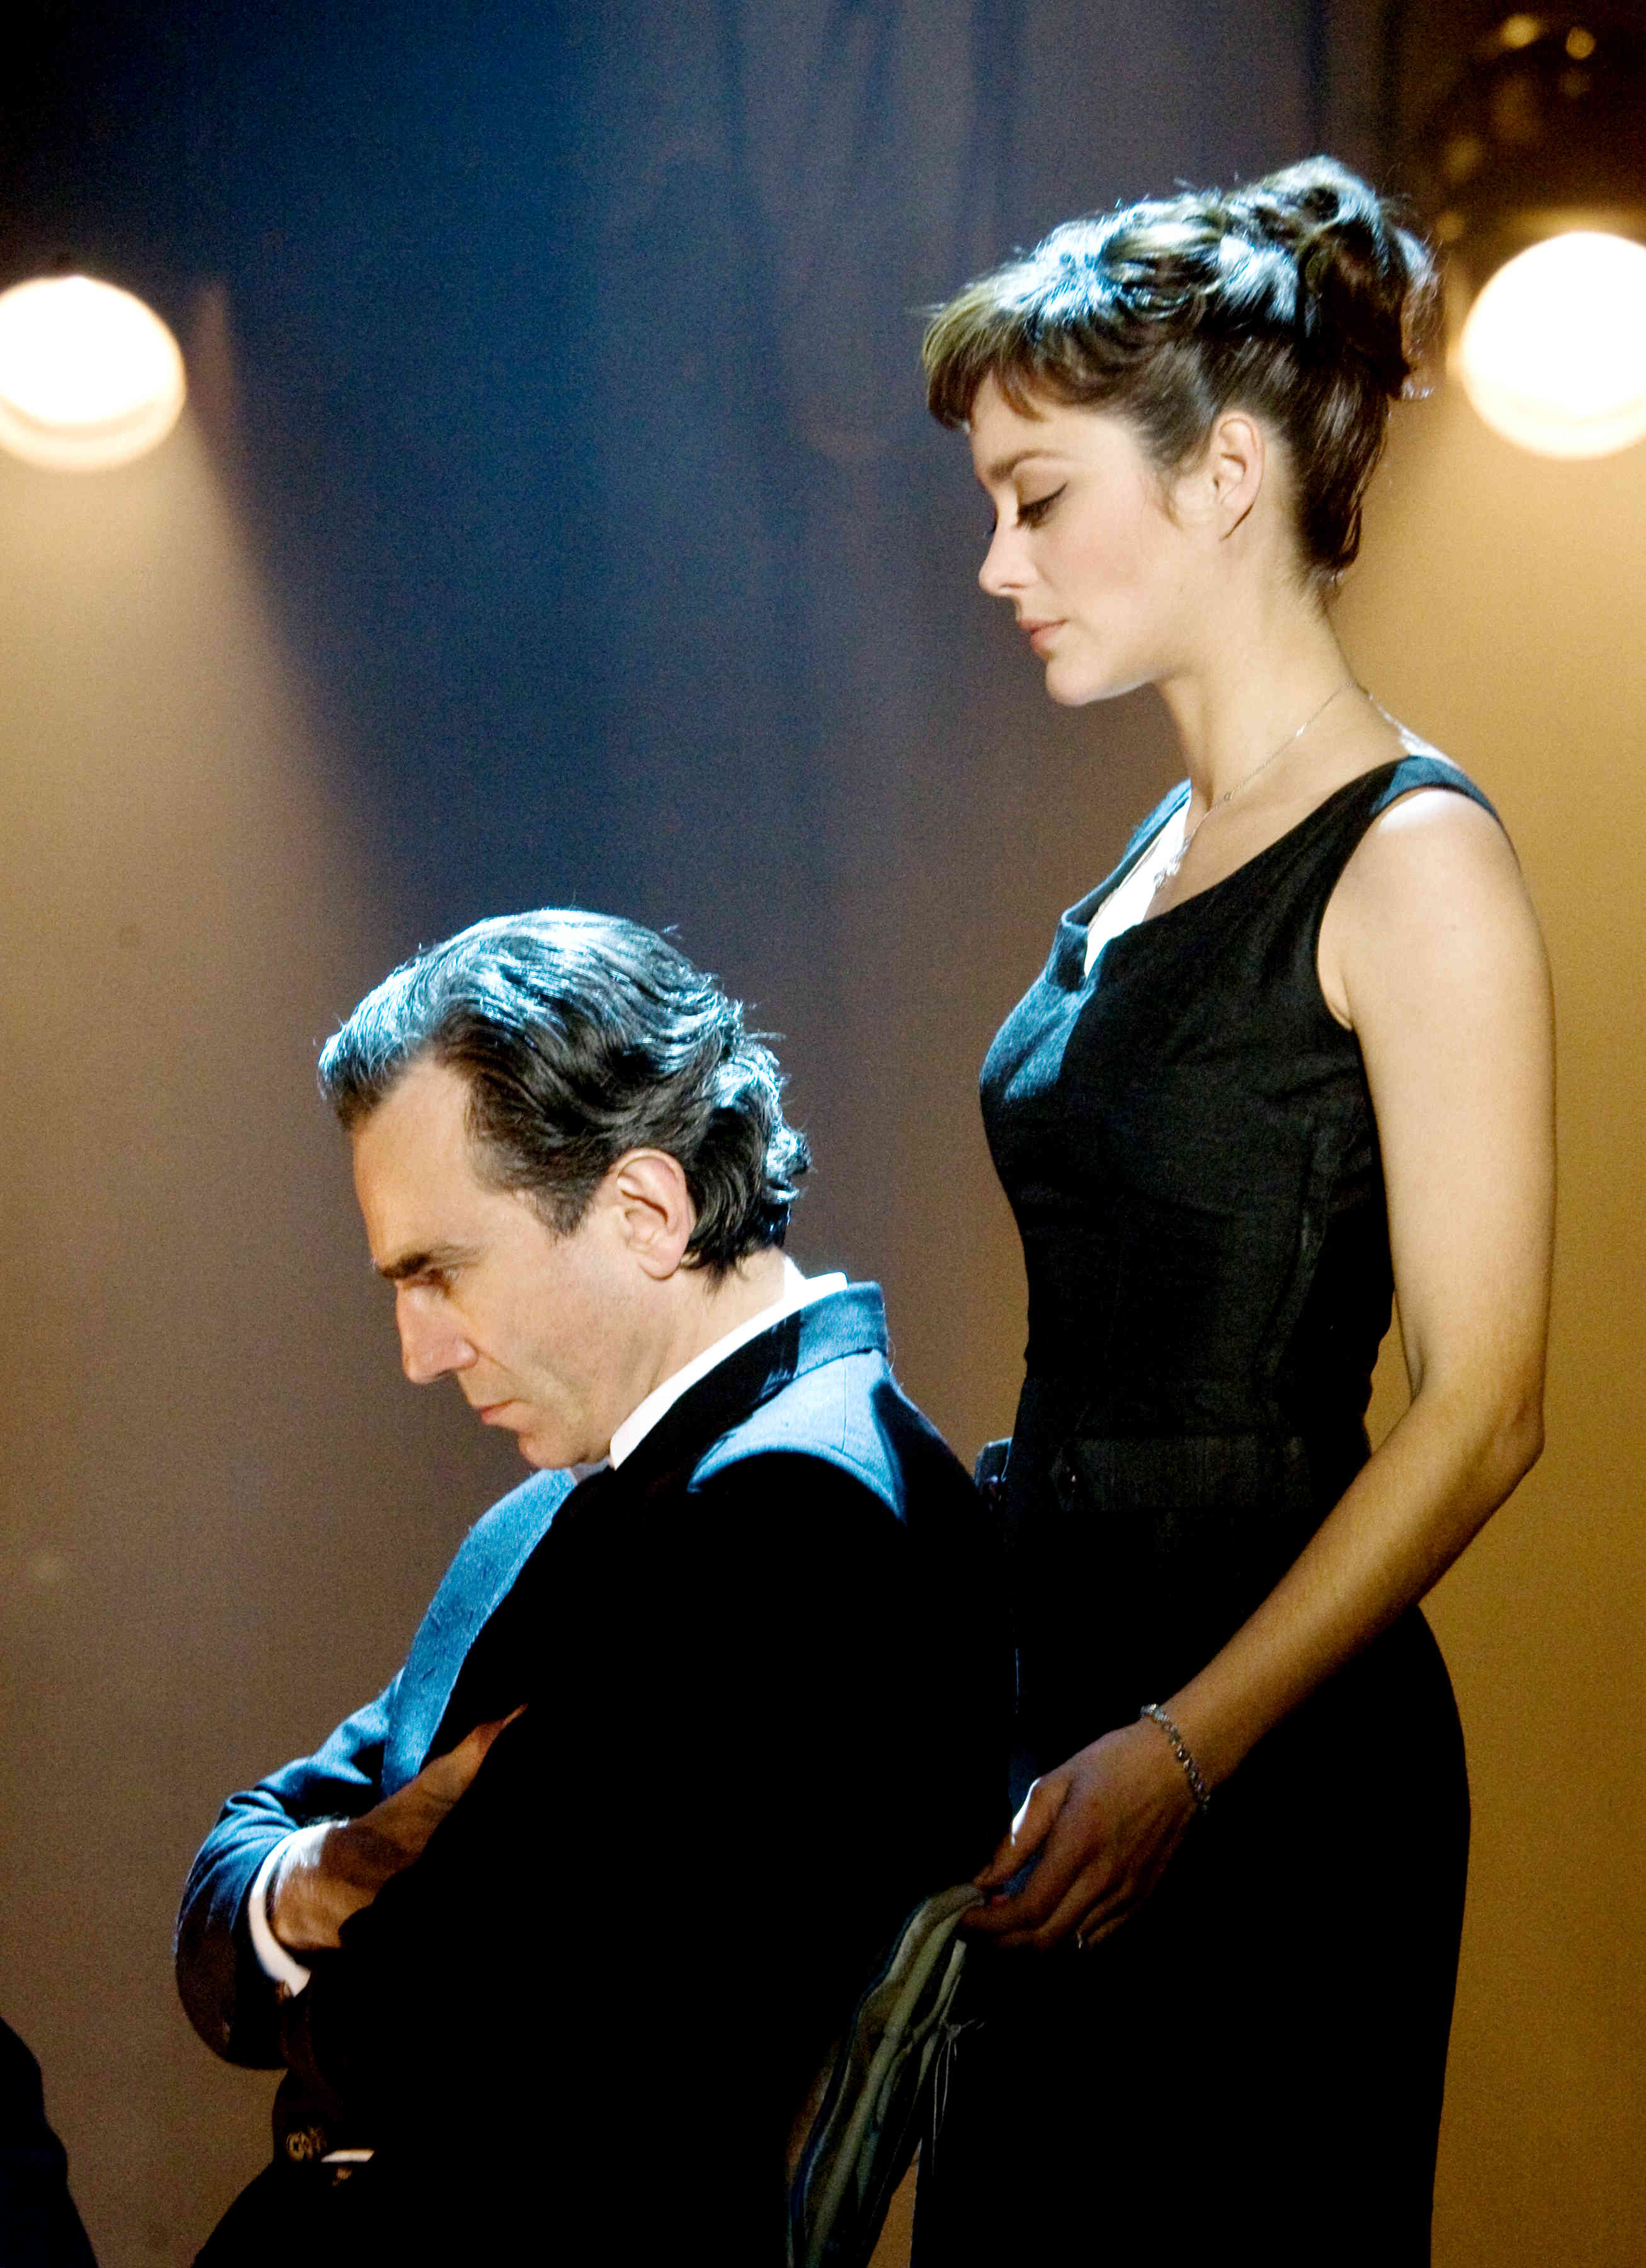 Daniel Day-Lewis stars as Guido Contini and Marion Cotillard stars as Luisa Contini in The Weinstein Company's Nine (2009). Photo credit by David James.